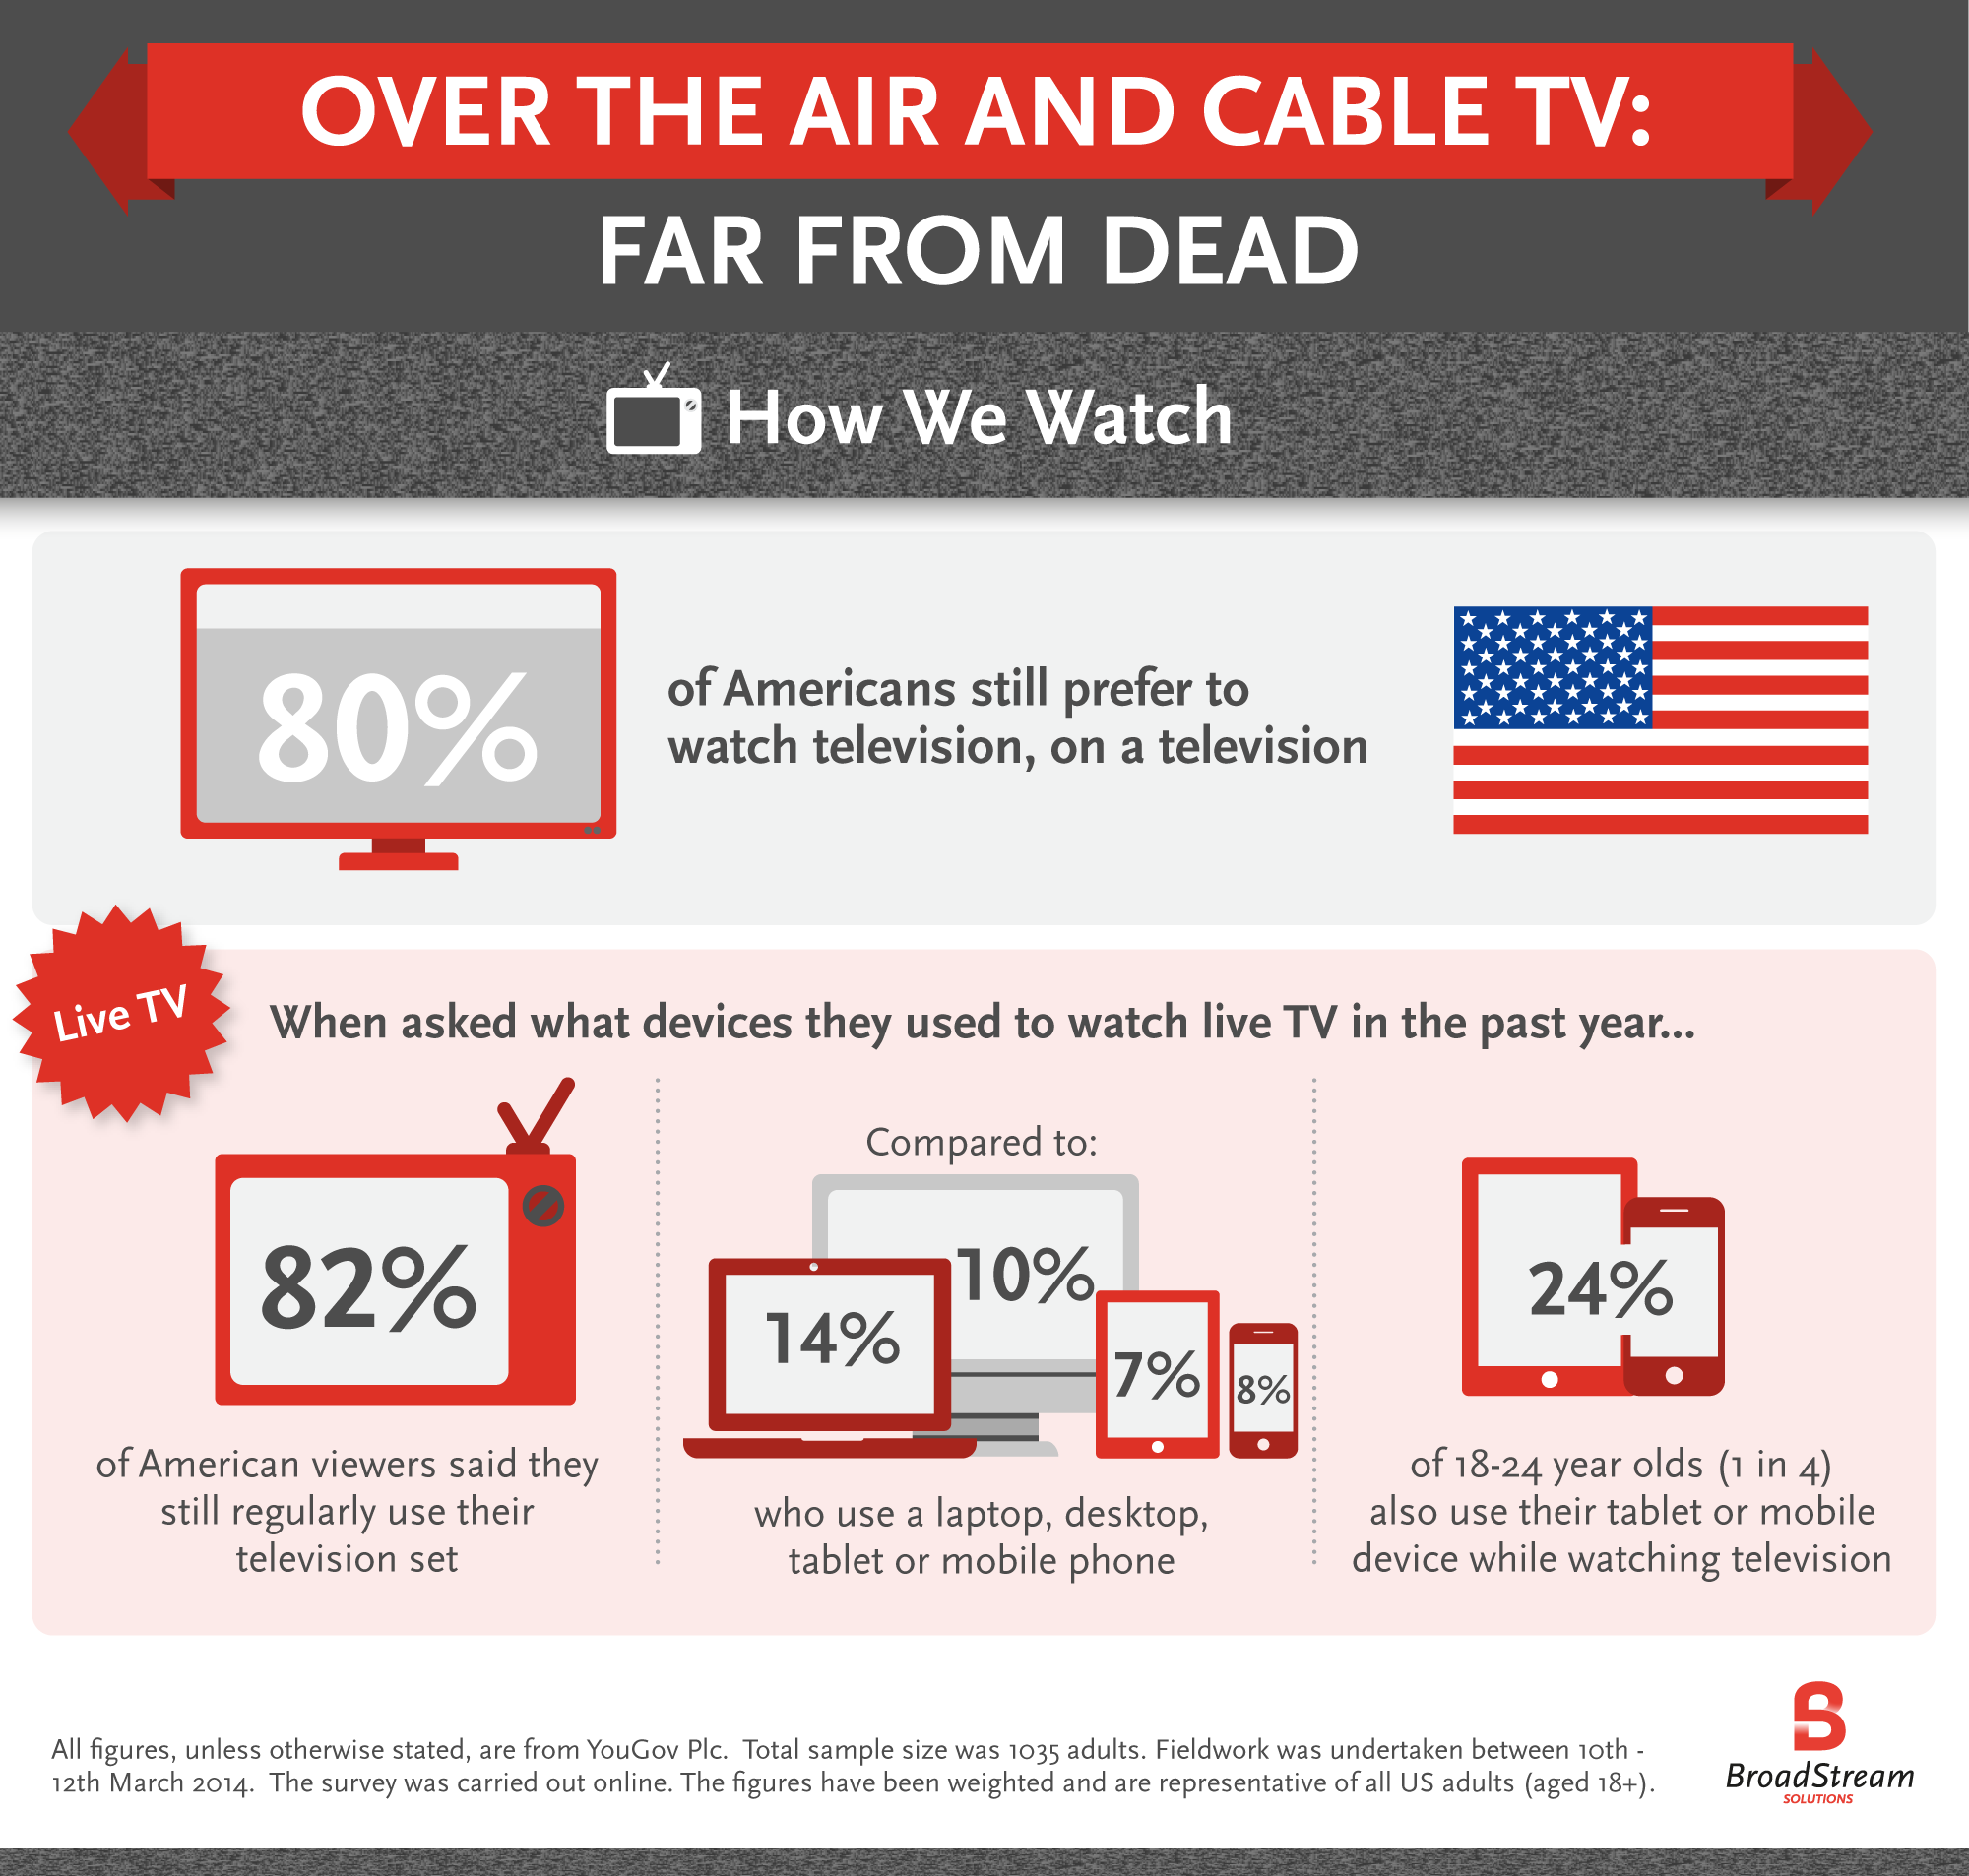 Over The Air and Cable TV: Far From Dead